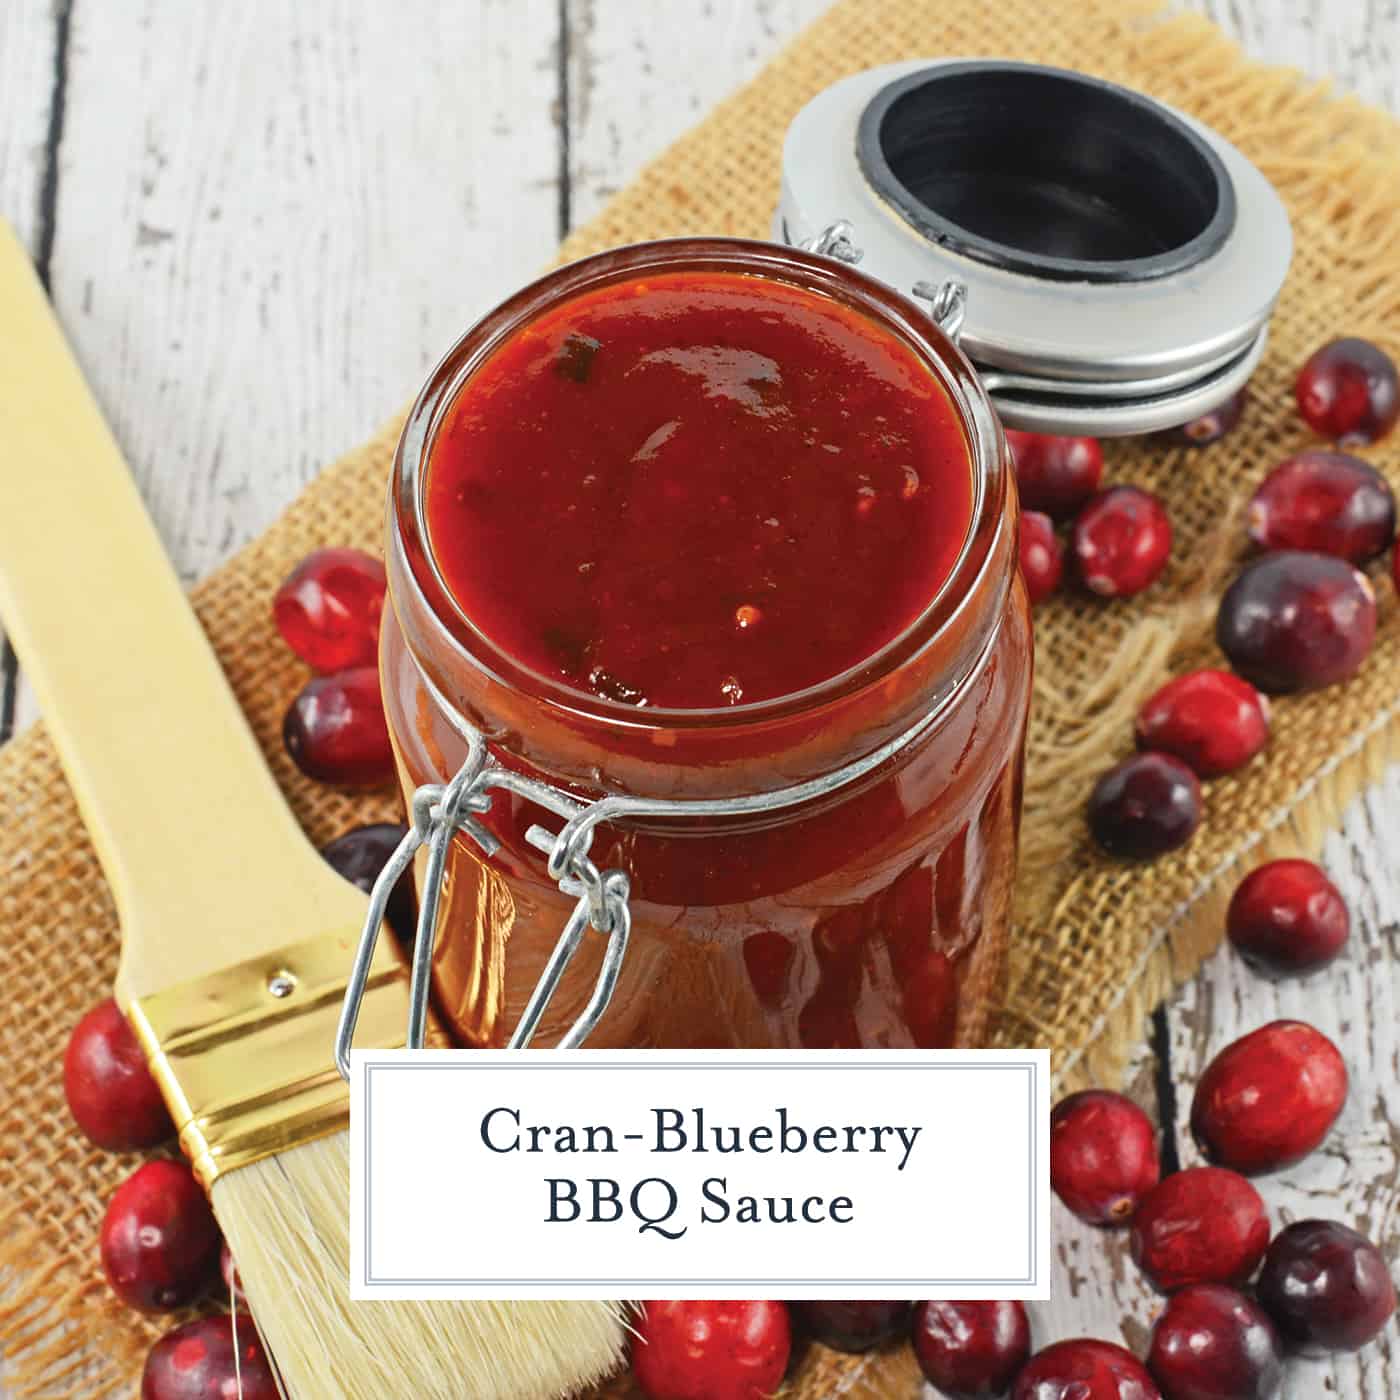 Cran Blueberry BBQ Sauce is a zesty sauce for grilled chicken, seafood or even vegetables. Sweet with a little bit of tang and a spike of coffee. ##BBQsaucerecipe #homemadeBBQsauce www.savoryexperiments.com 